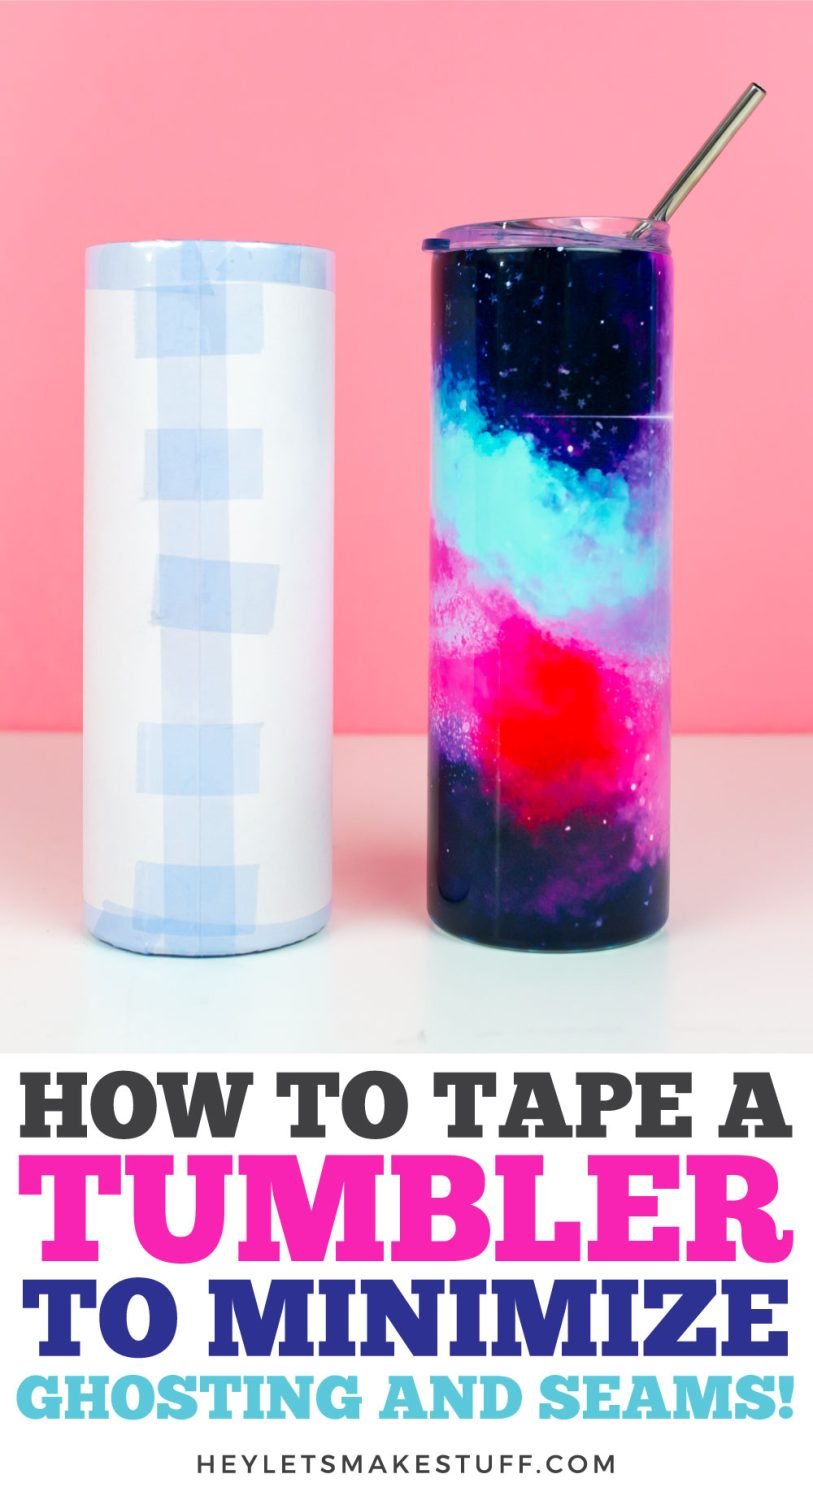 How to Tape a Tumbler pin image